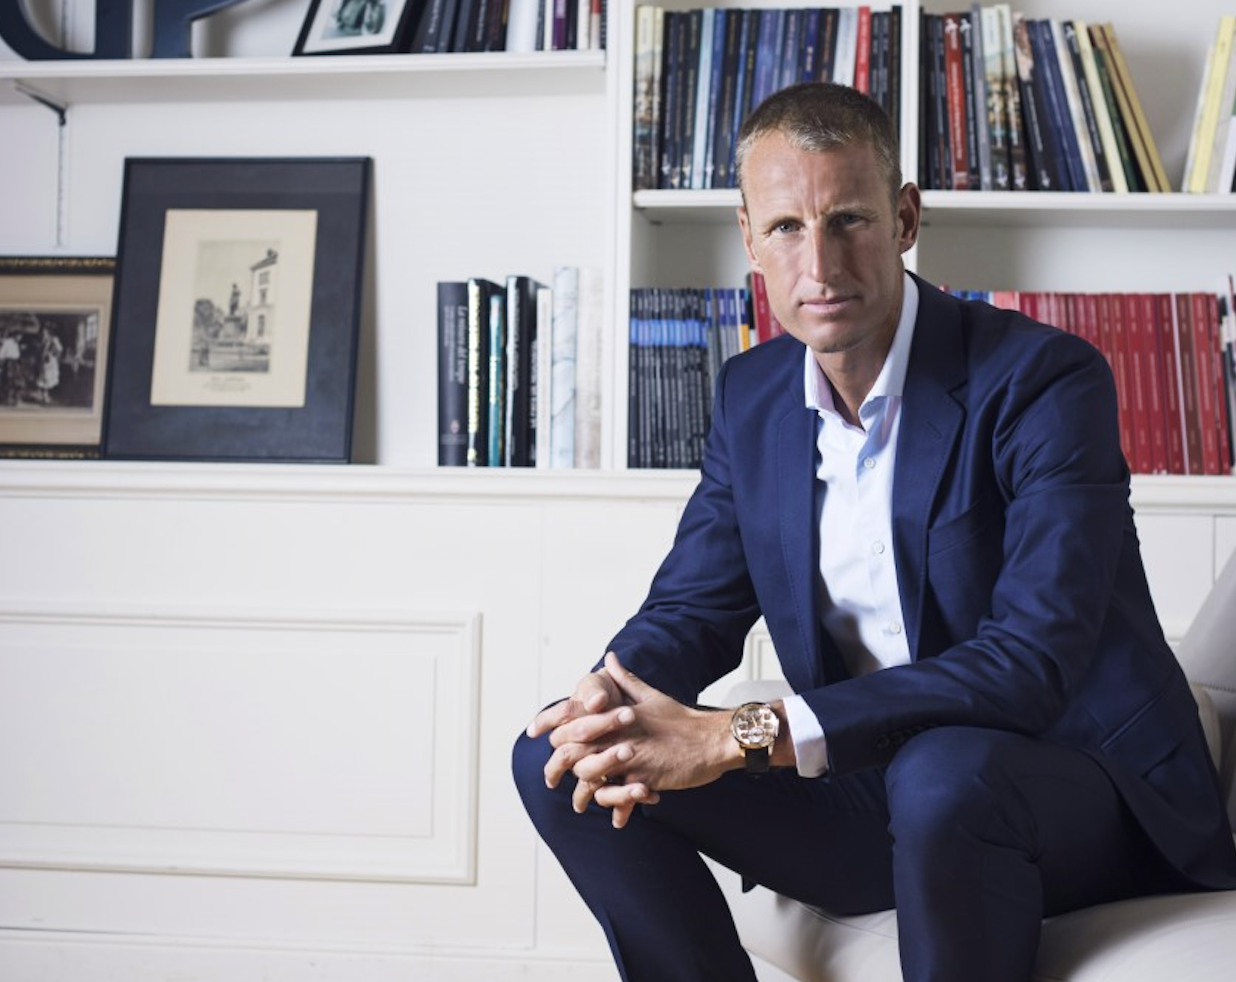 Girard-Perregaux CEO Patrick Pruniaux on the Brand's Latest Timepieces